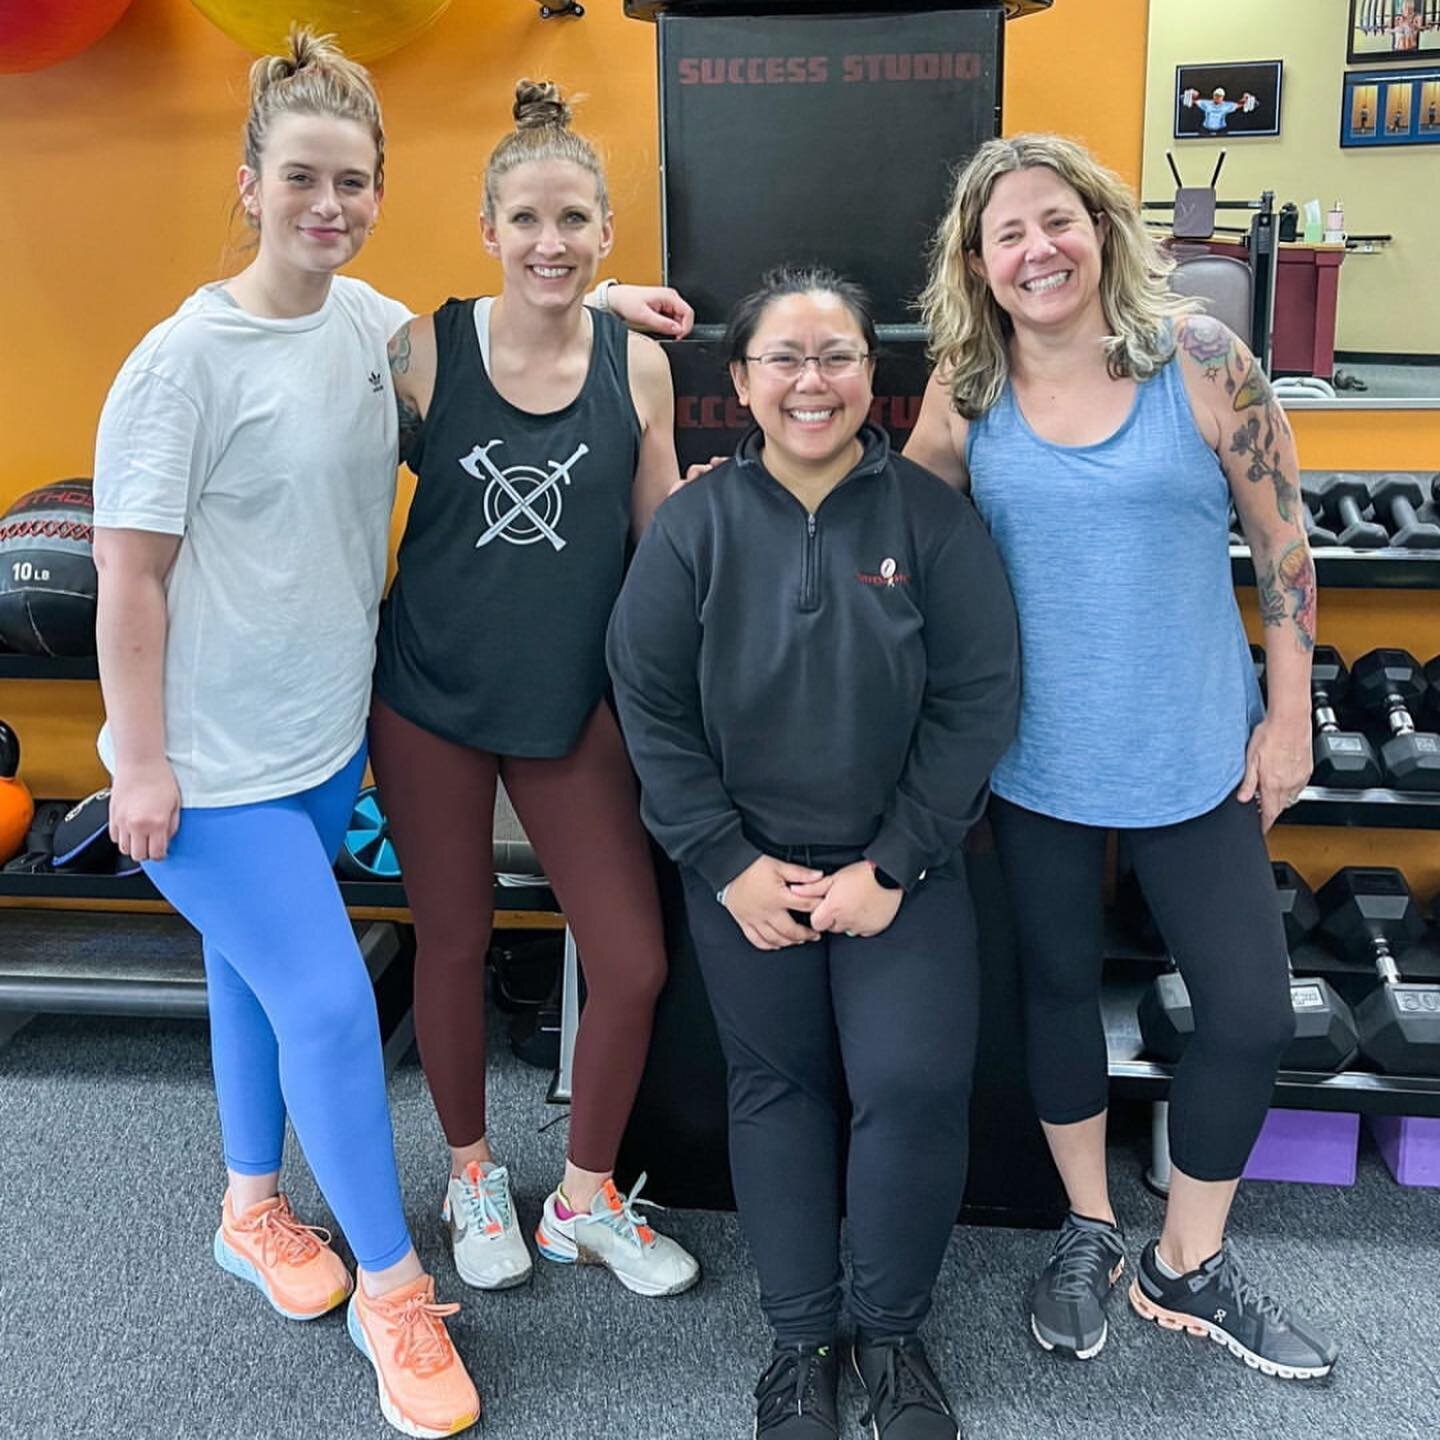 Client spotlight: we love training Marjorie and her team at @themarjorieadamteam - it's great to see businesses who take care of their staff - what better way to bond than with a good sweat! Thanks for trusting us to take care of your team 

P.s. int